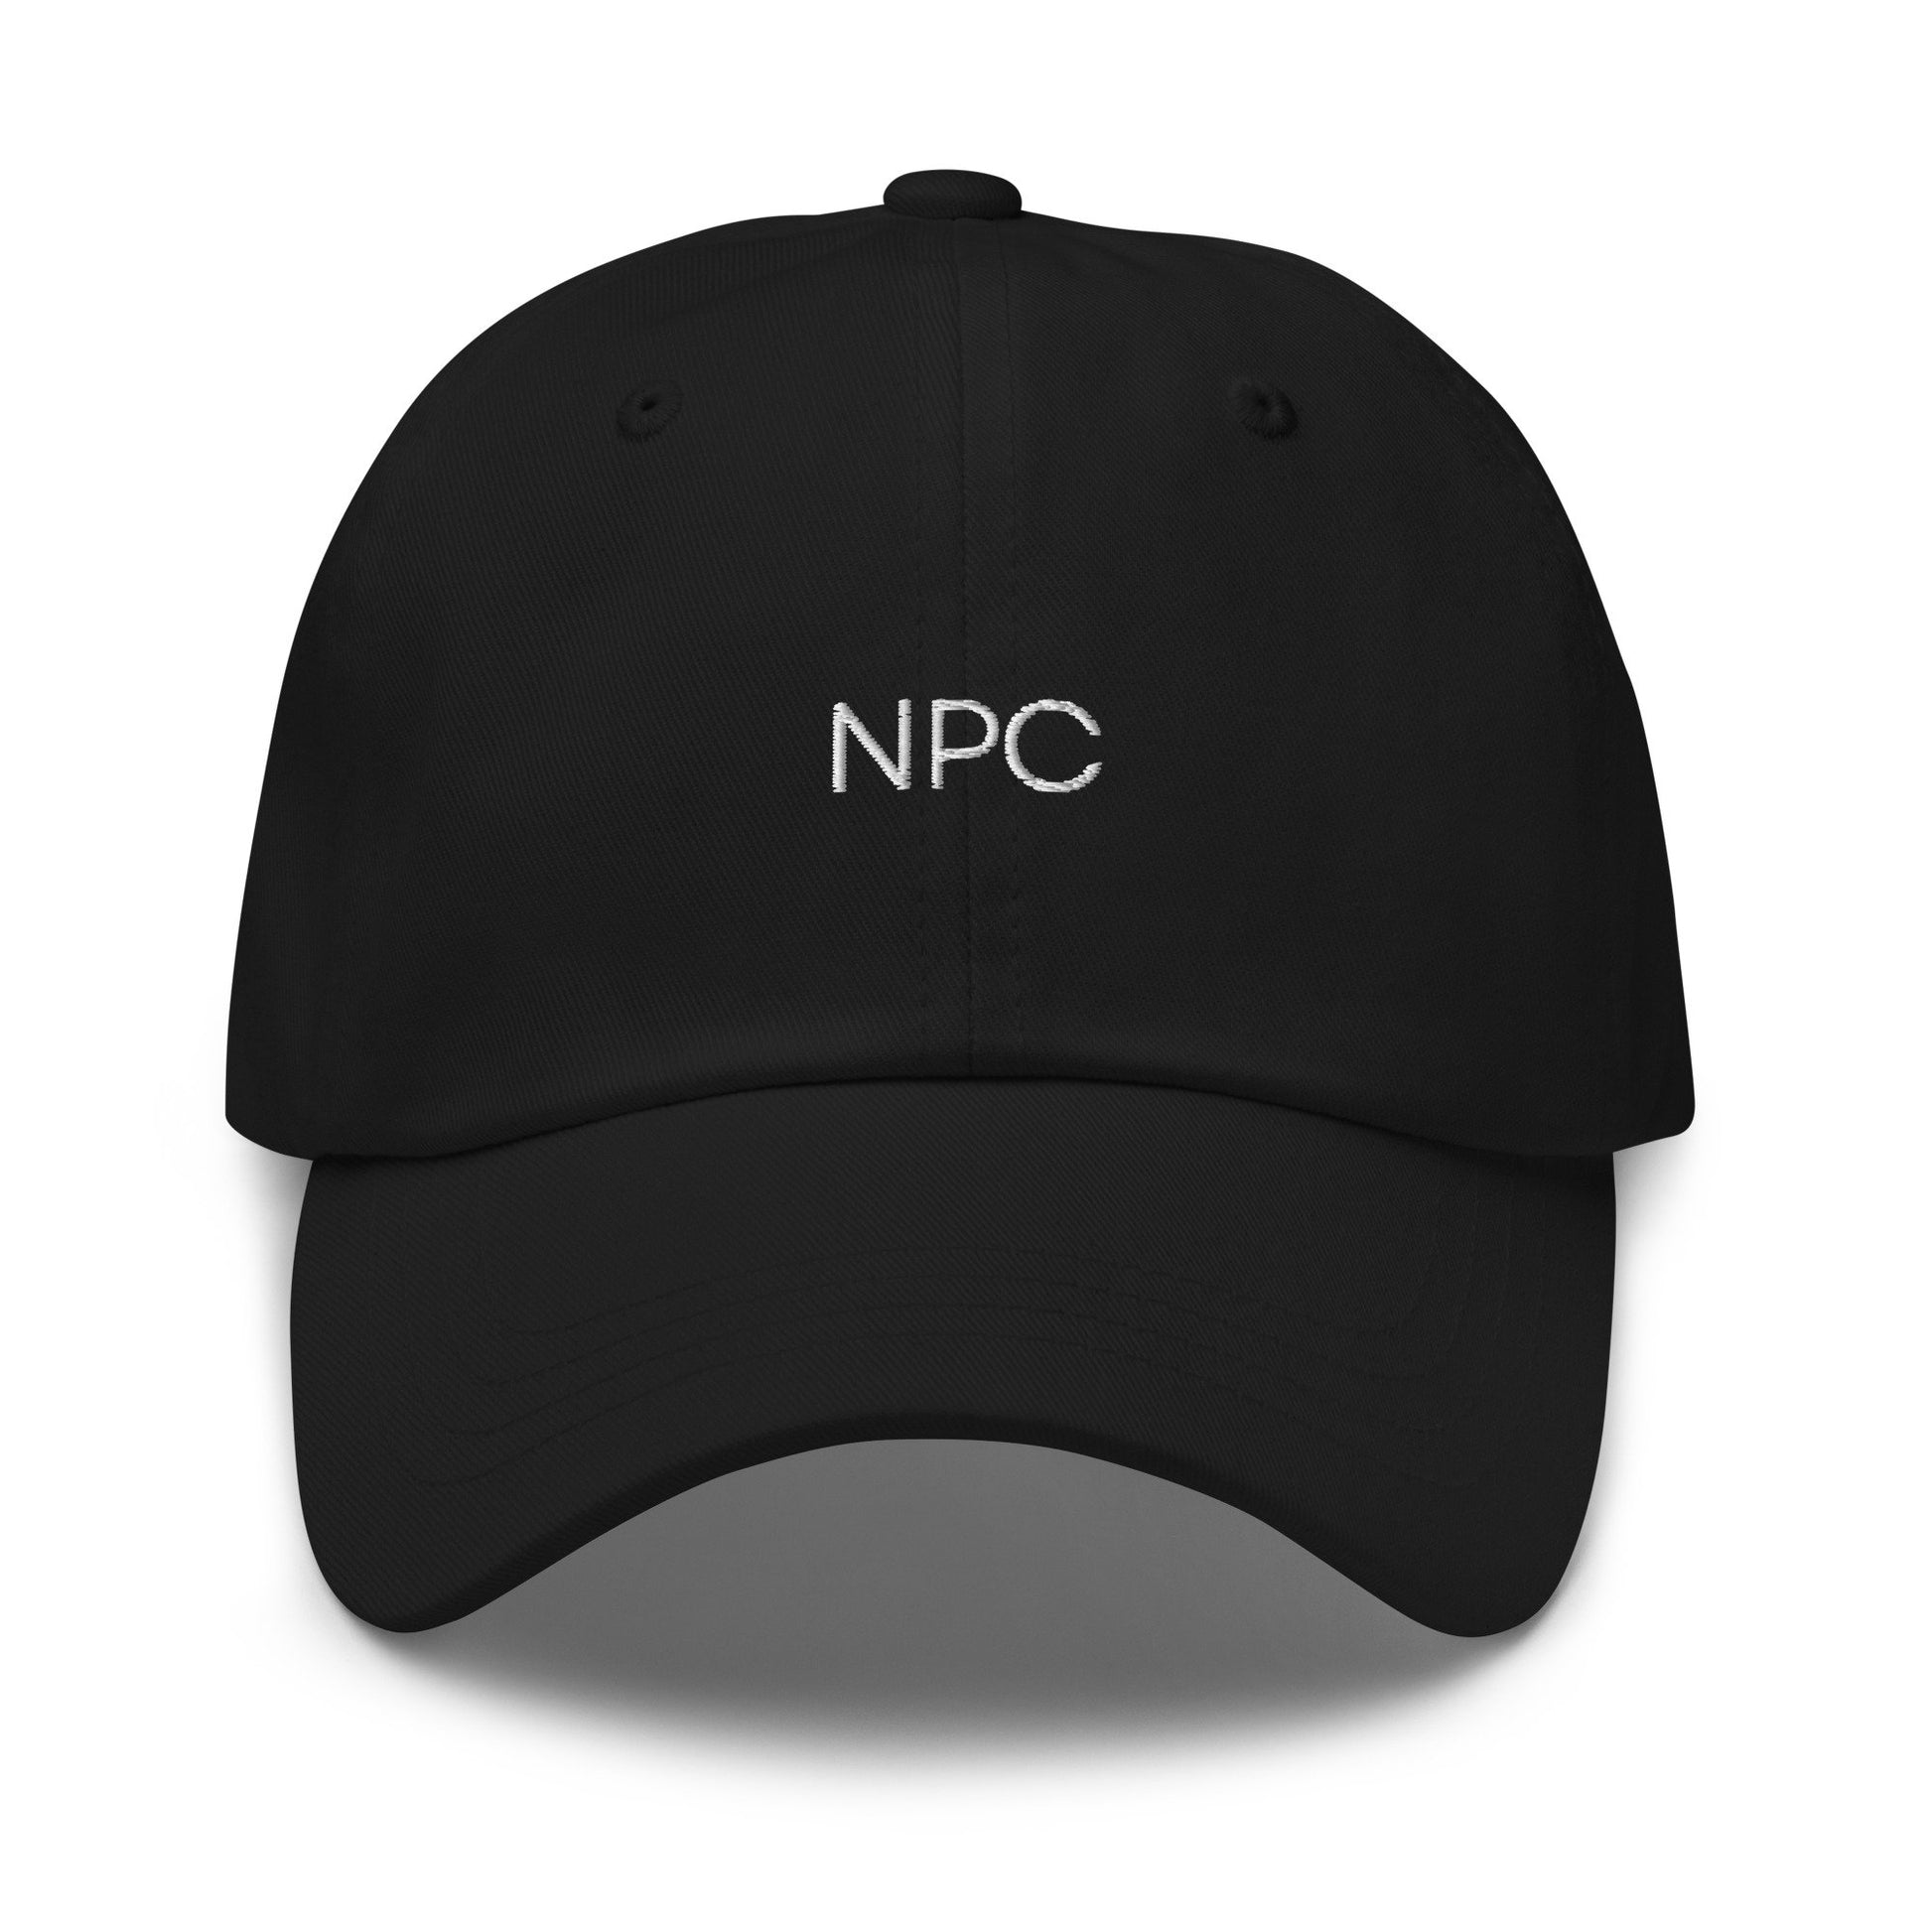 NPC Hat - Life is a Simulation - Non-player Character - Cotton Embroidered Cap